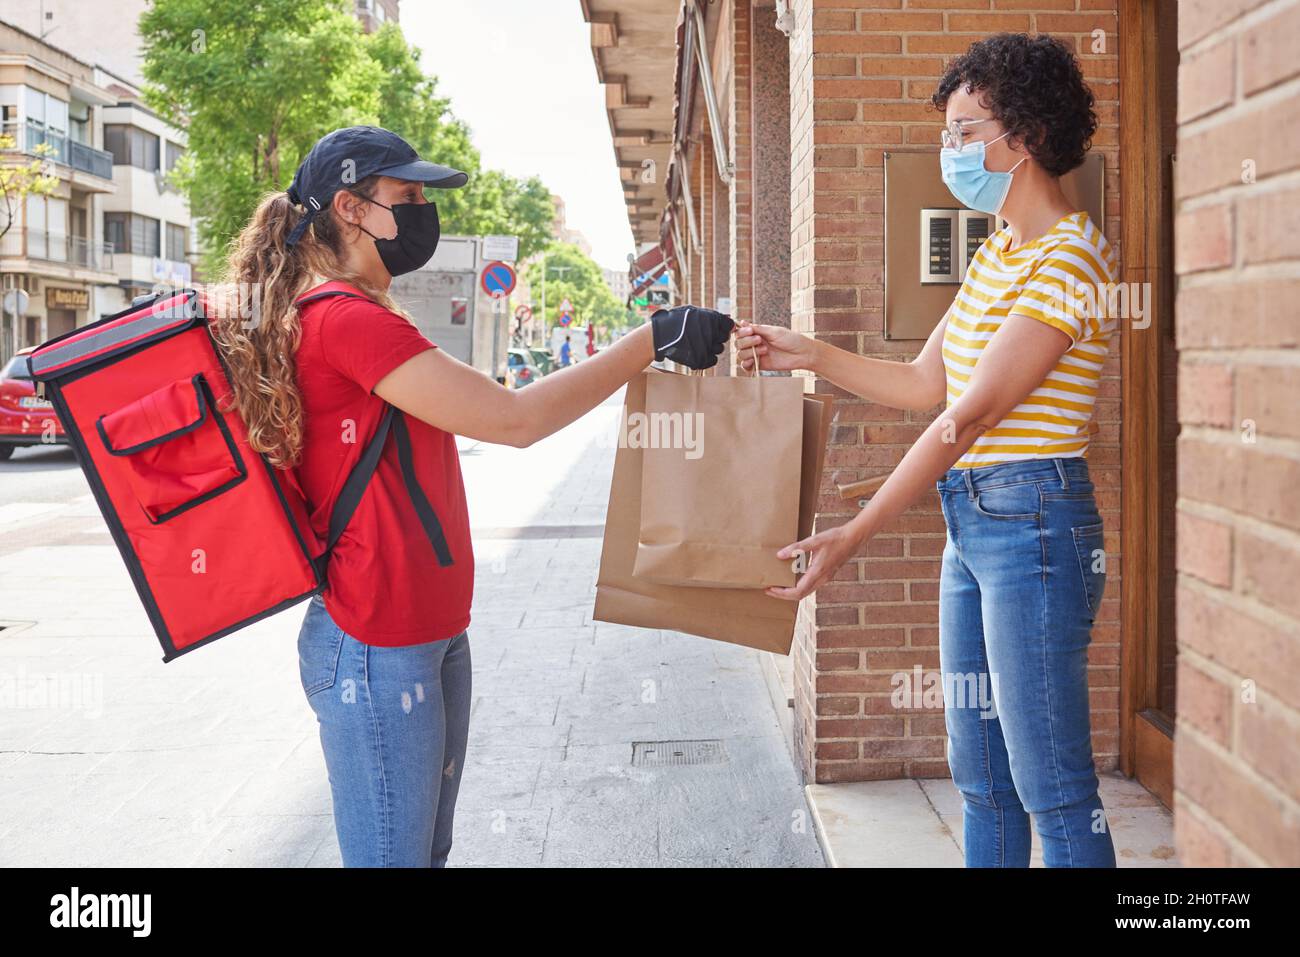 A delivery girl with a face mask delivers bags of food on the street Stock Photo